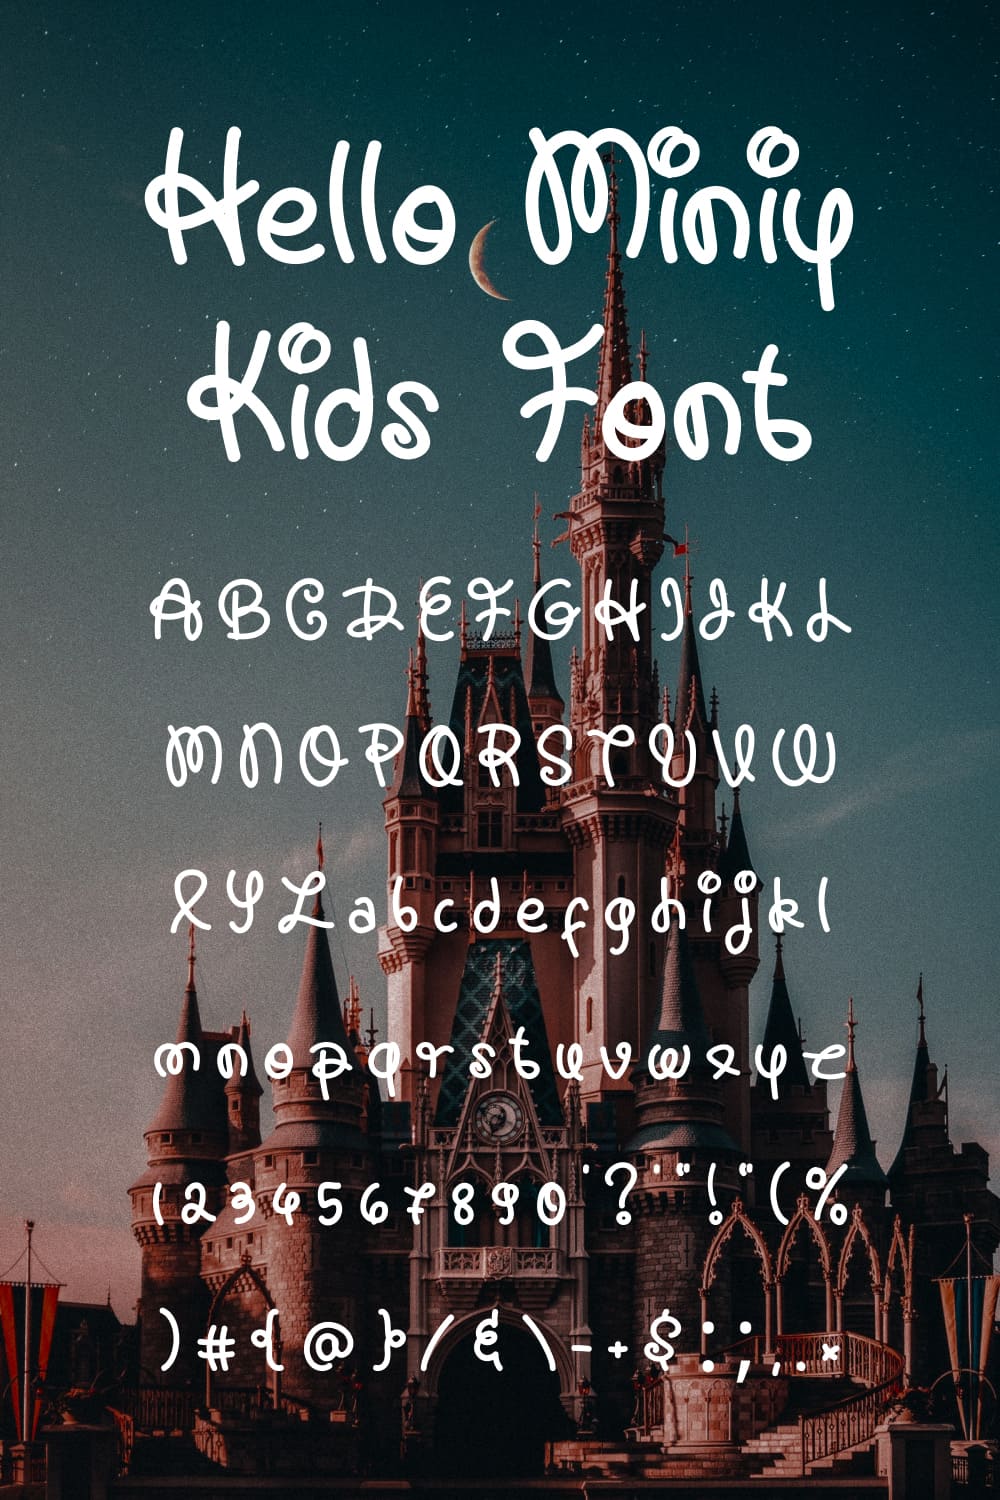 The font is like a trip to Disneyland.